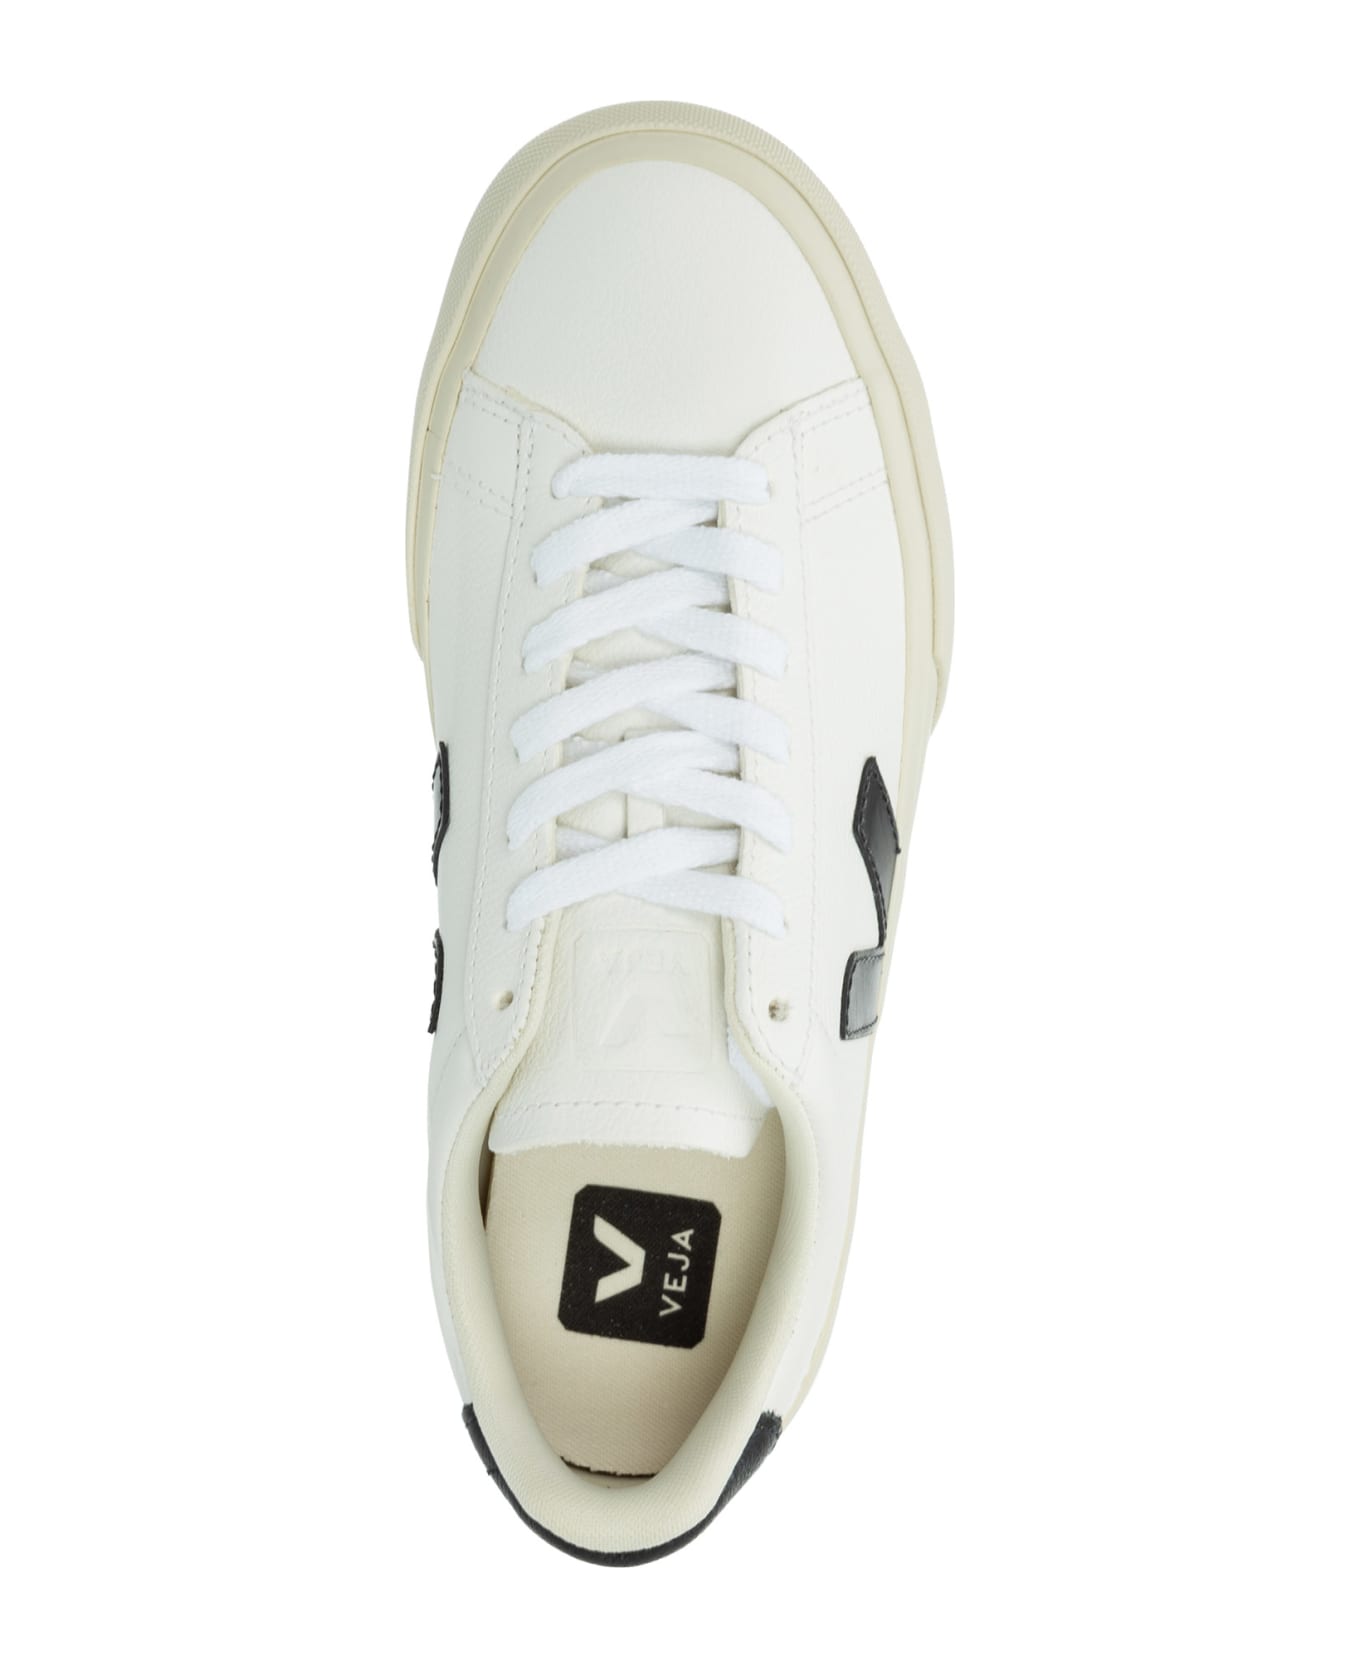 Veja Campo Leather Sneakers - White/black スニーカー